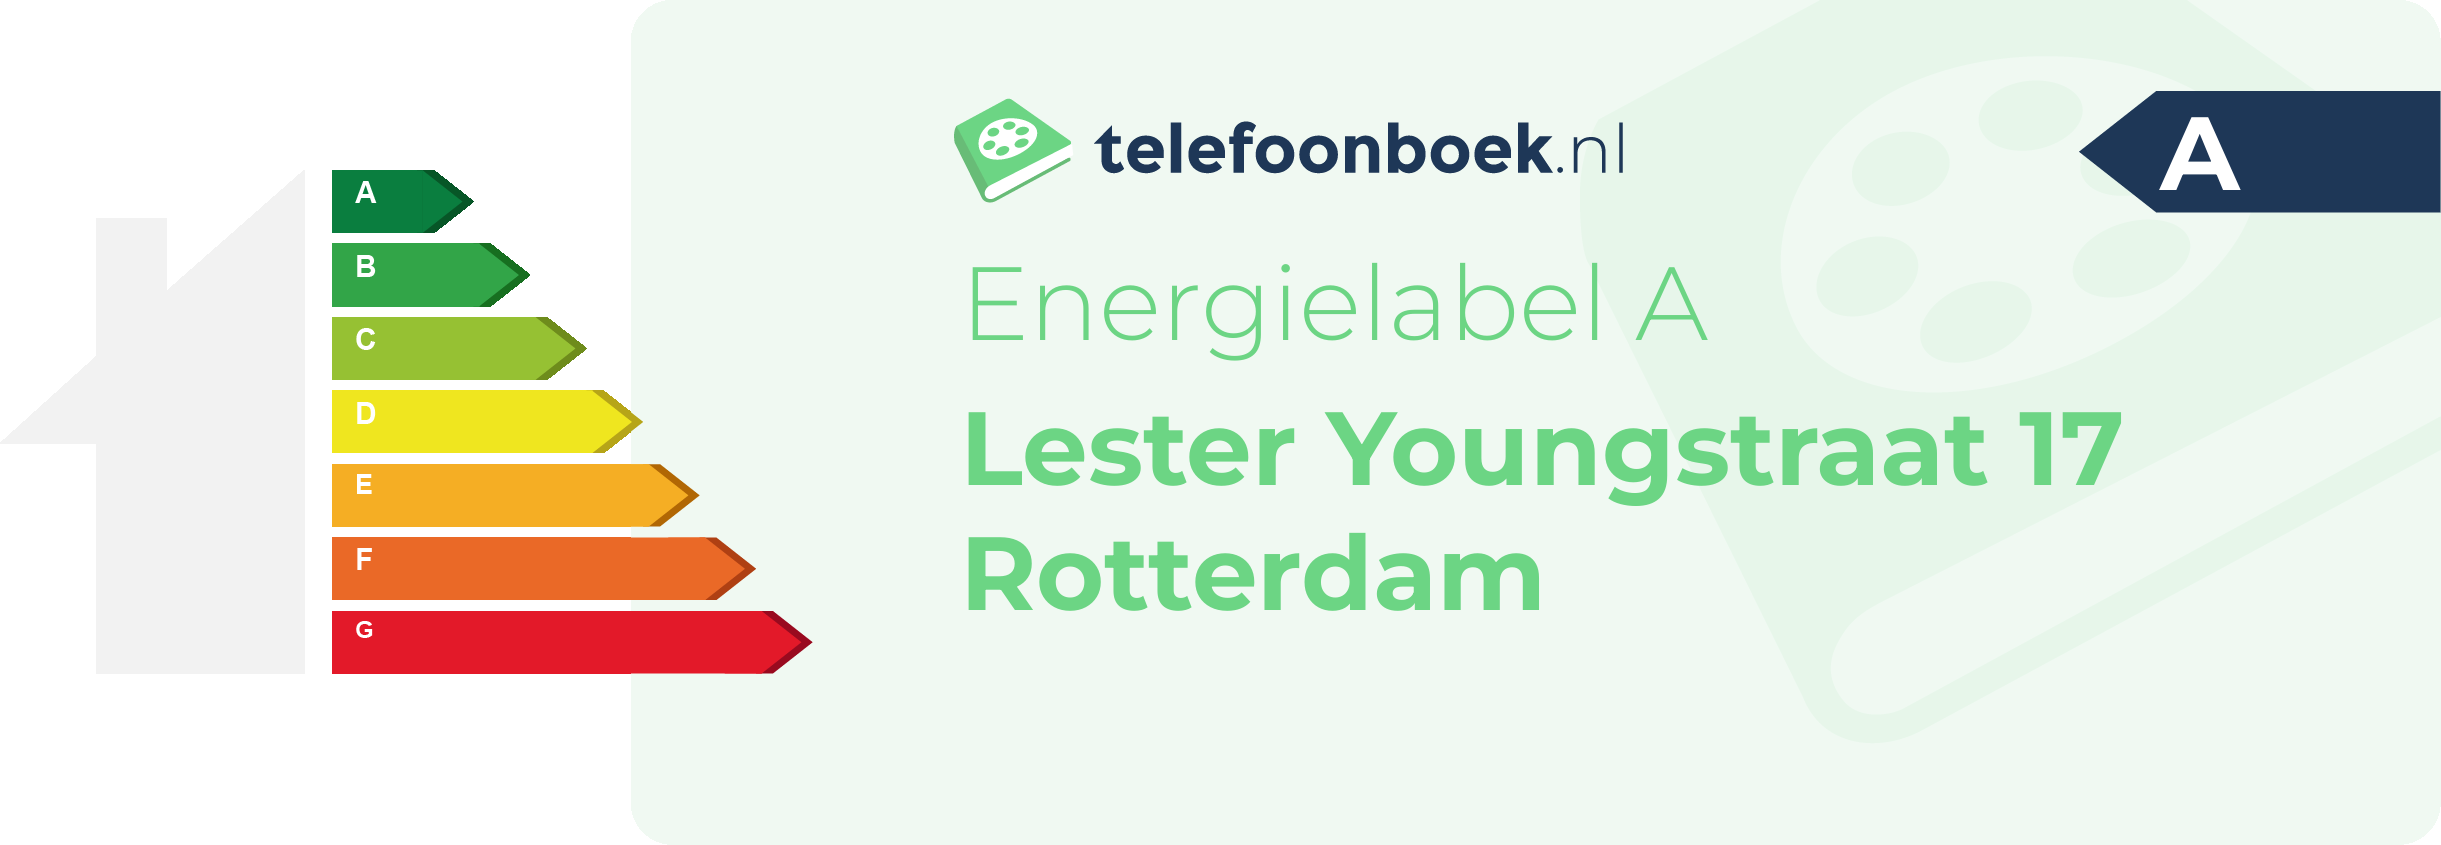 Energielabel Lester Youngstraat 17 Rotterdam